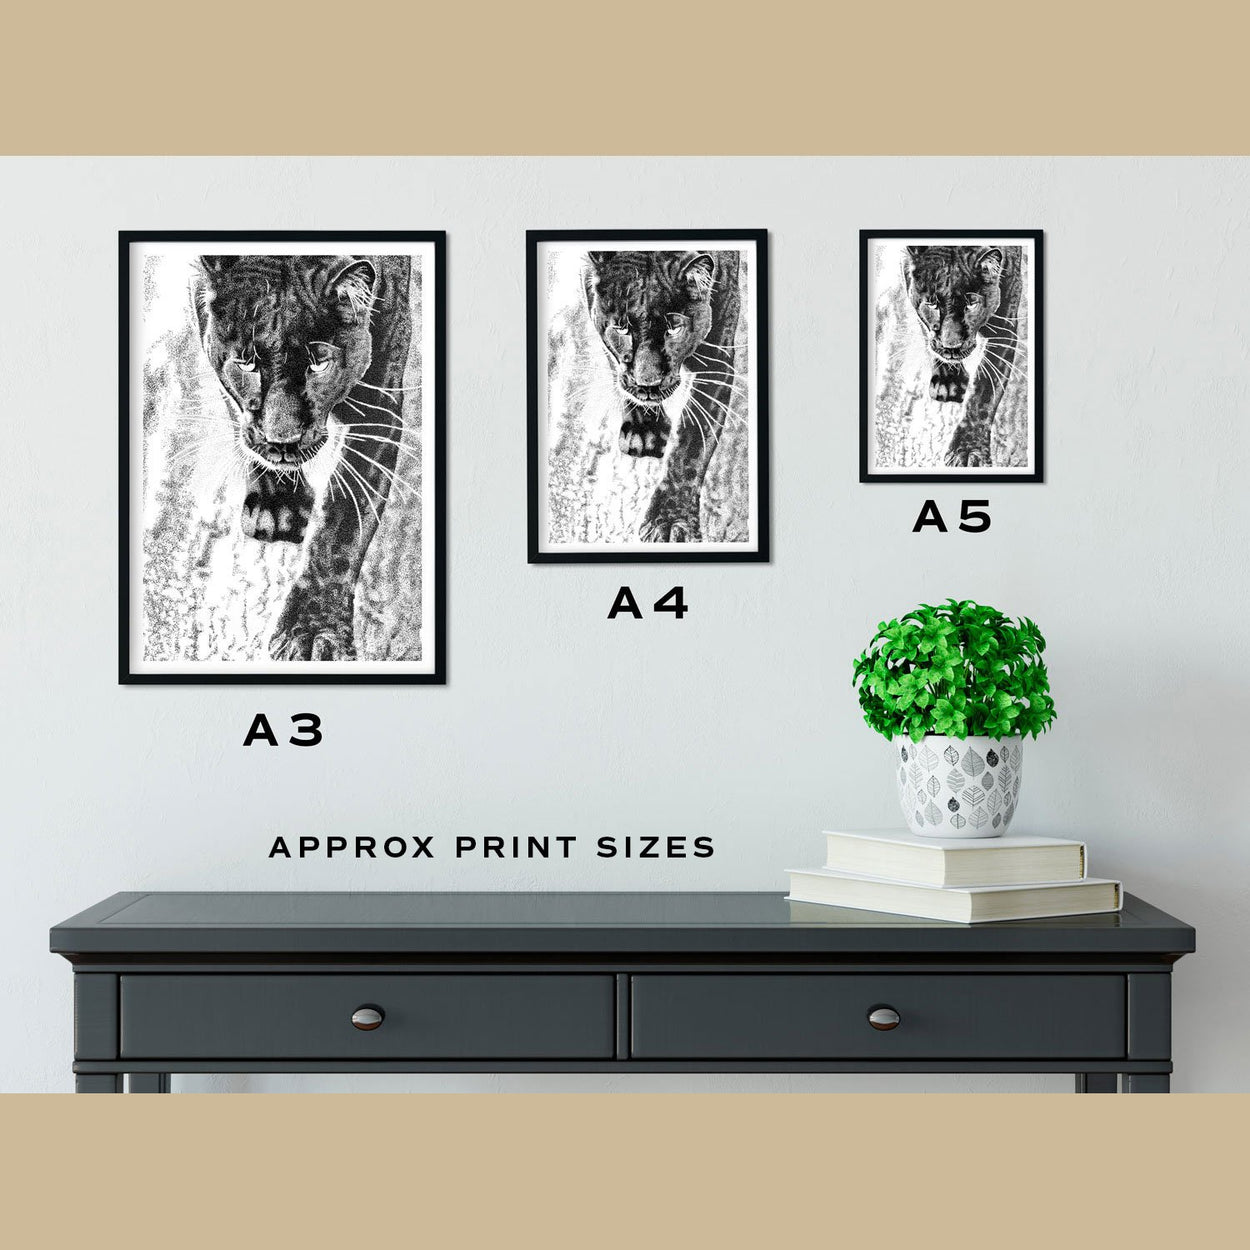 Black Leopard Wall Art Print Size Comparison - The Thriving Wild